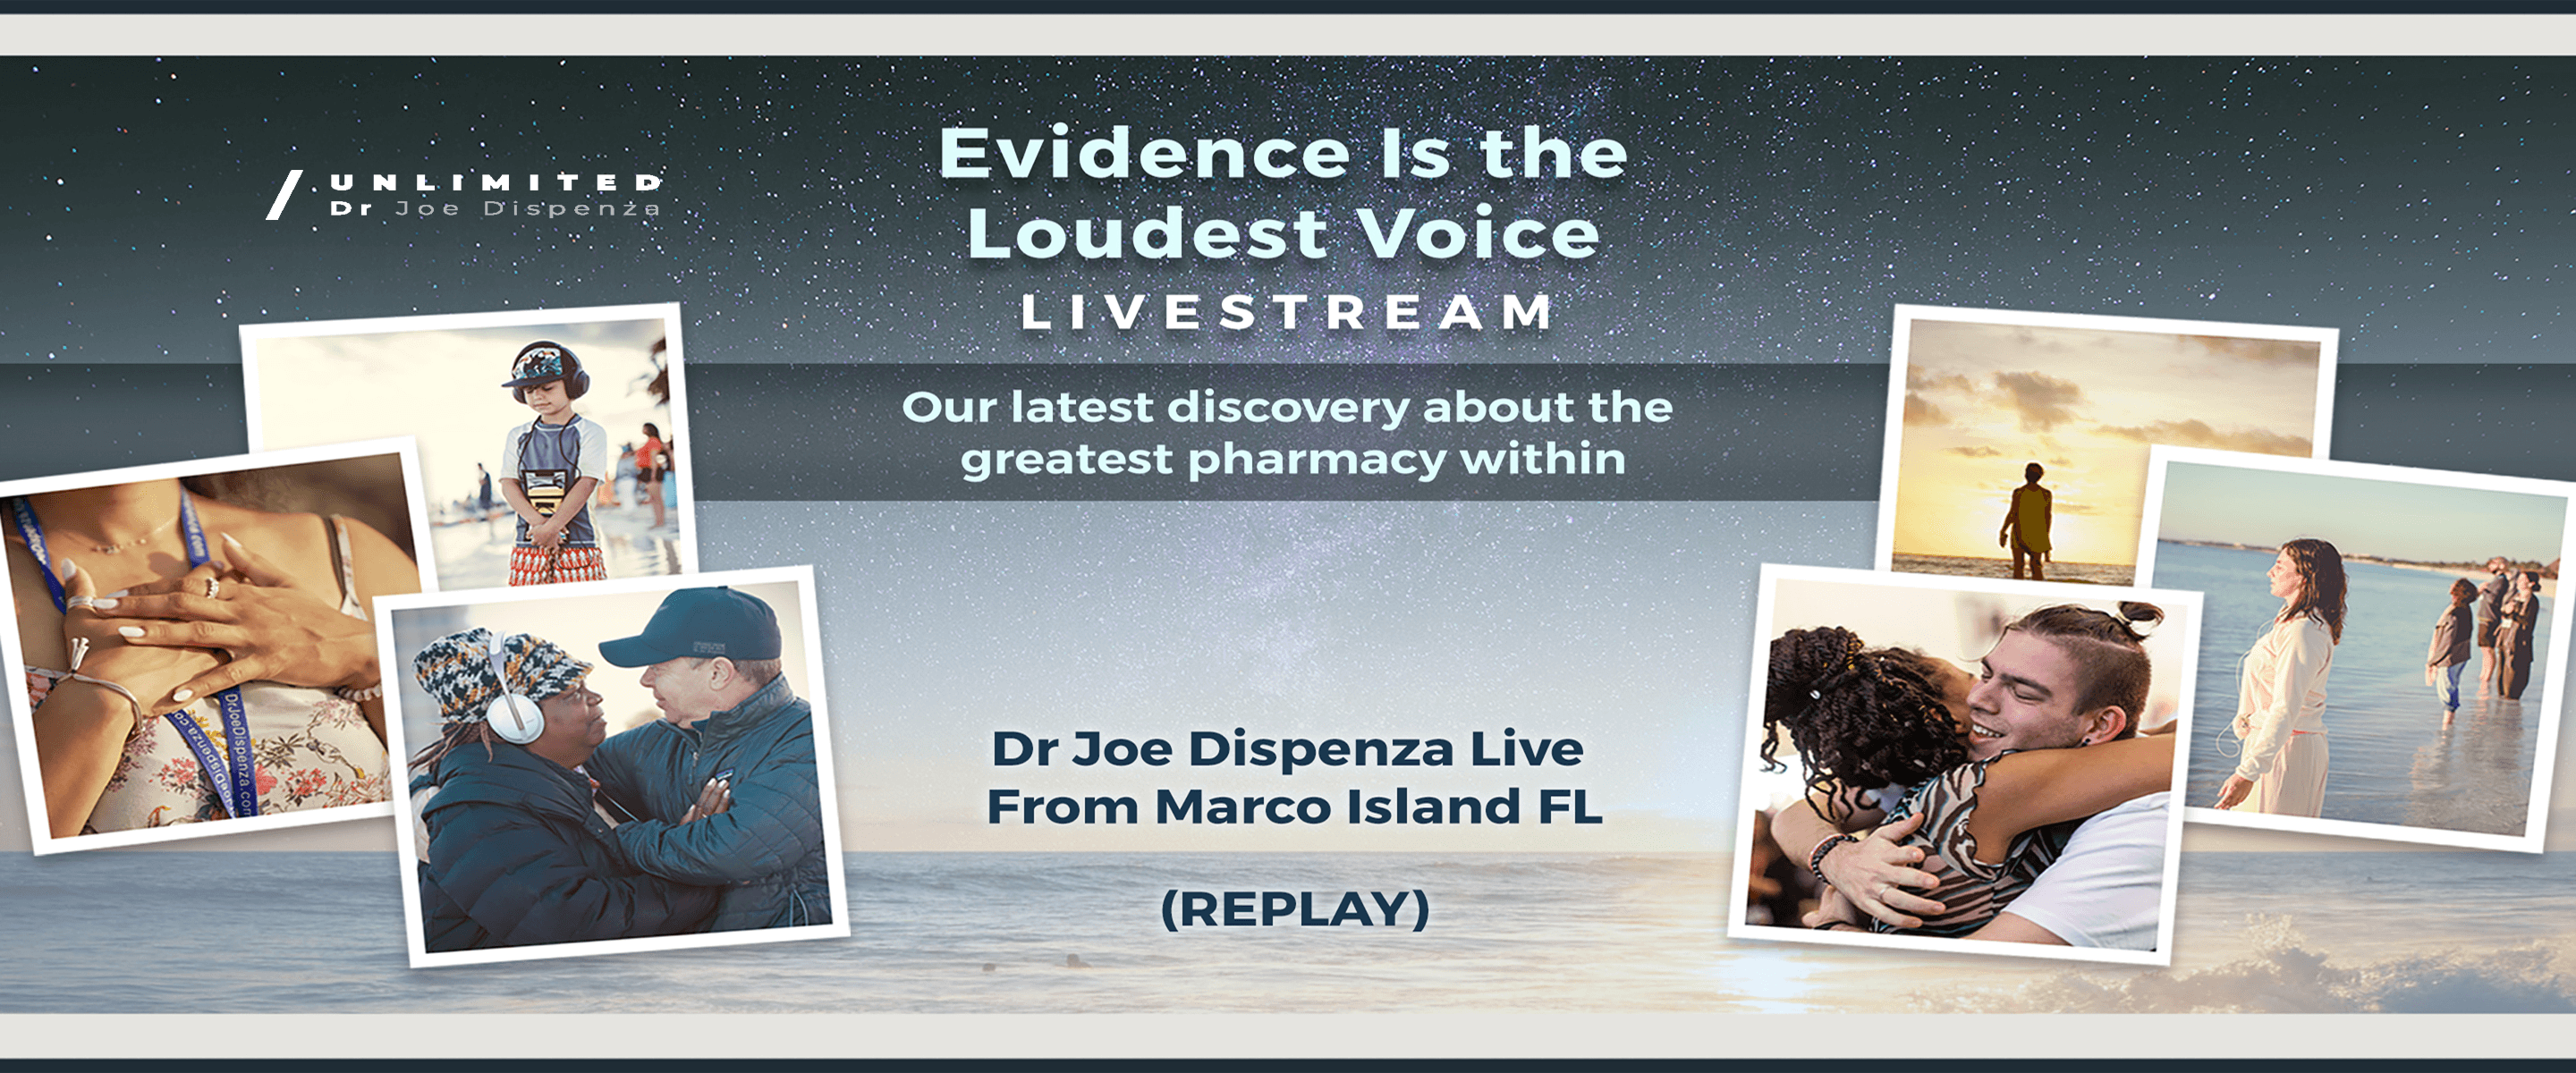 Evidence Is the Loudest Voice thumbnail